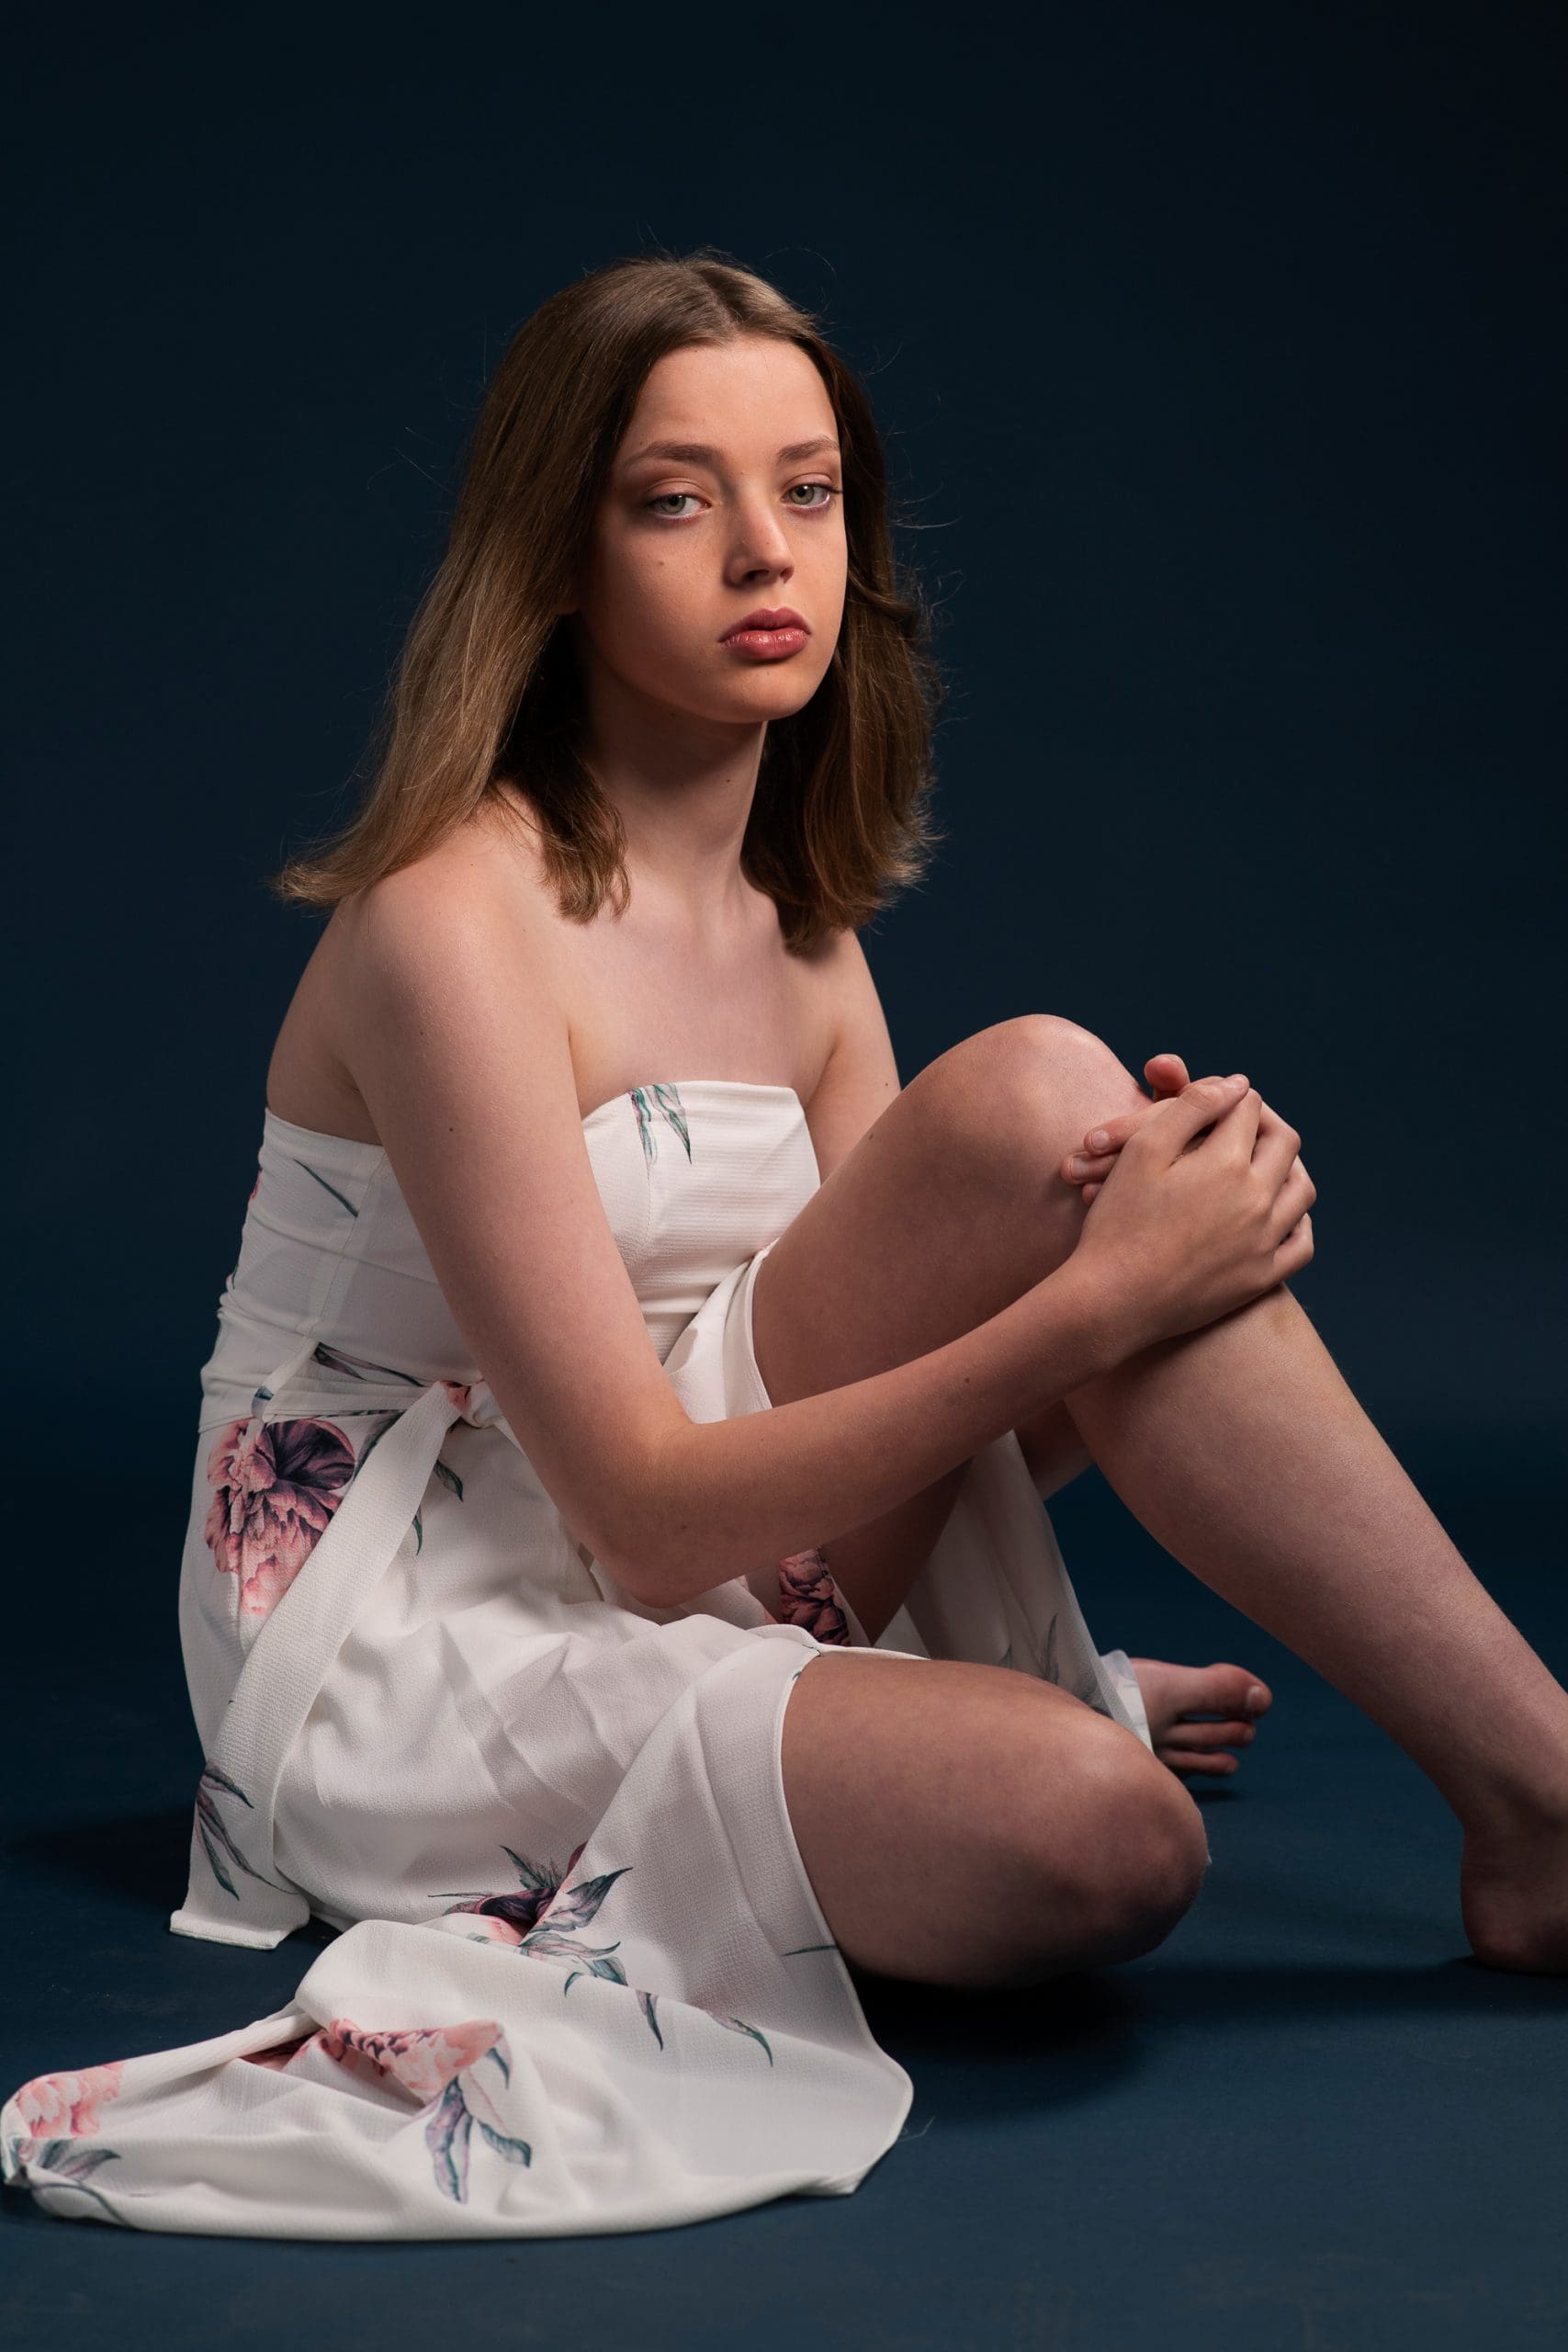 Melbourne teen model portfolio update taken in studio on a navy background. model wears a white floral dress and has a relaxed pose.